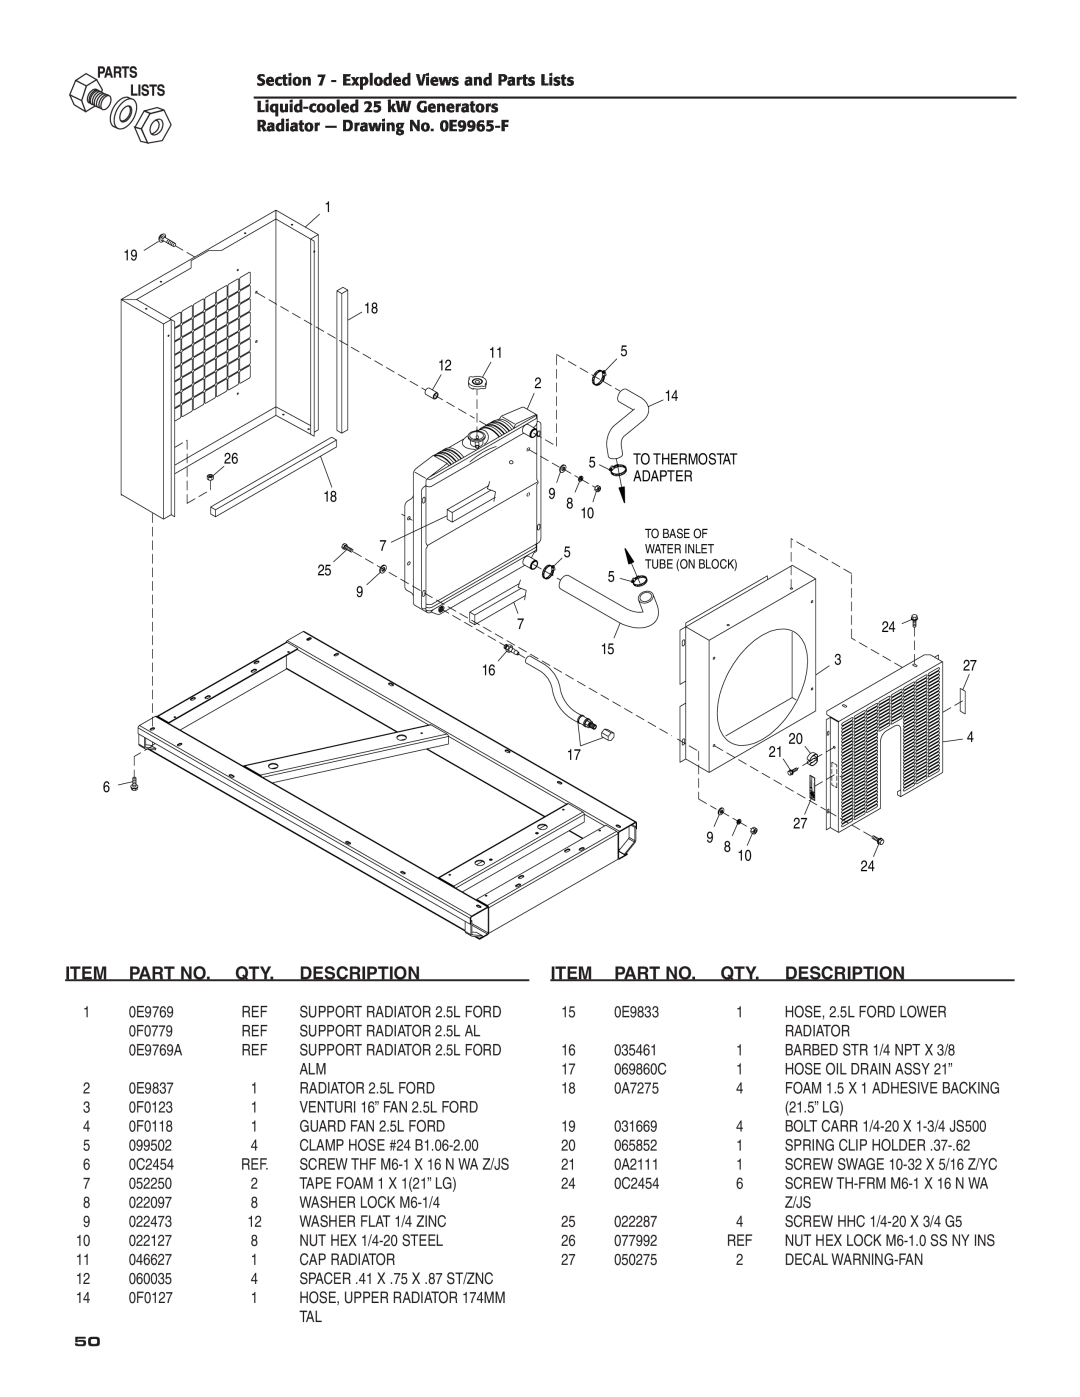 Generac 005031-2 Exploded Views and Parts Lists, Liquid-cooled25 kW Generators, Radiator - Drawing No. 0E9965-F, Adapter 